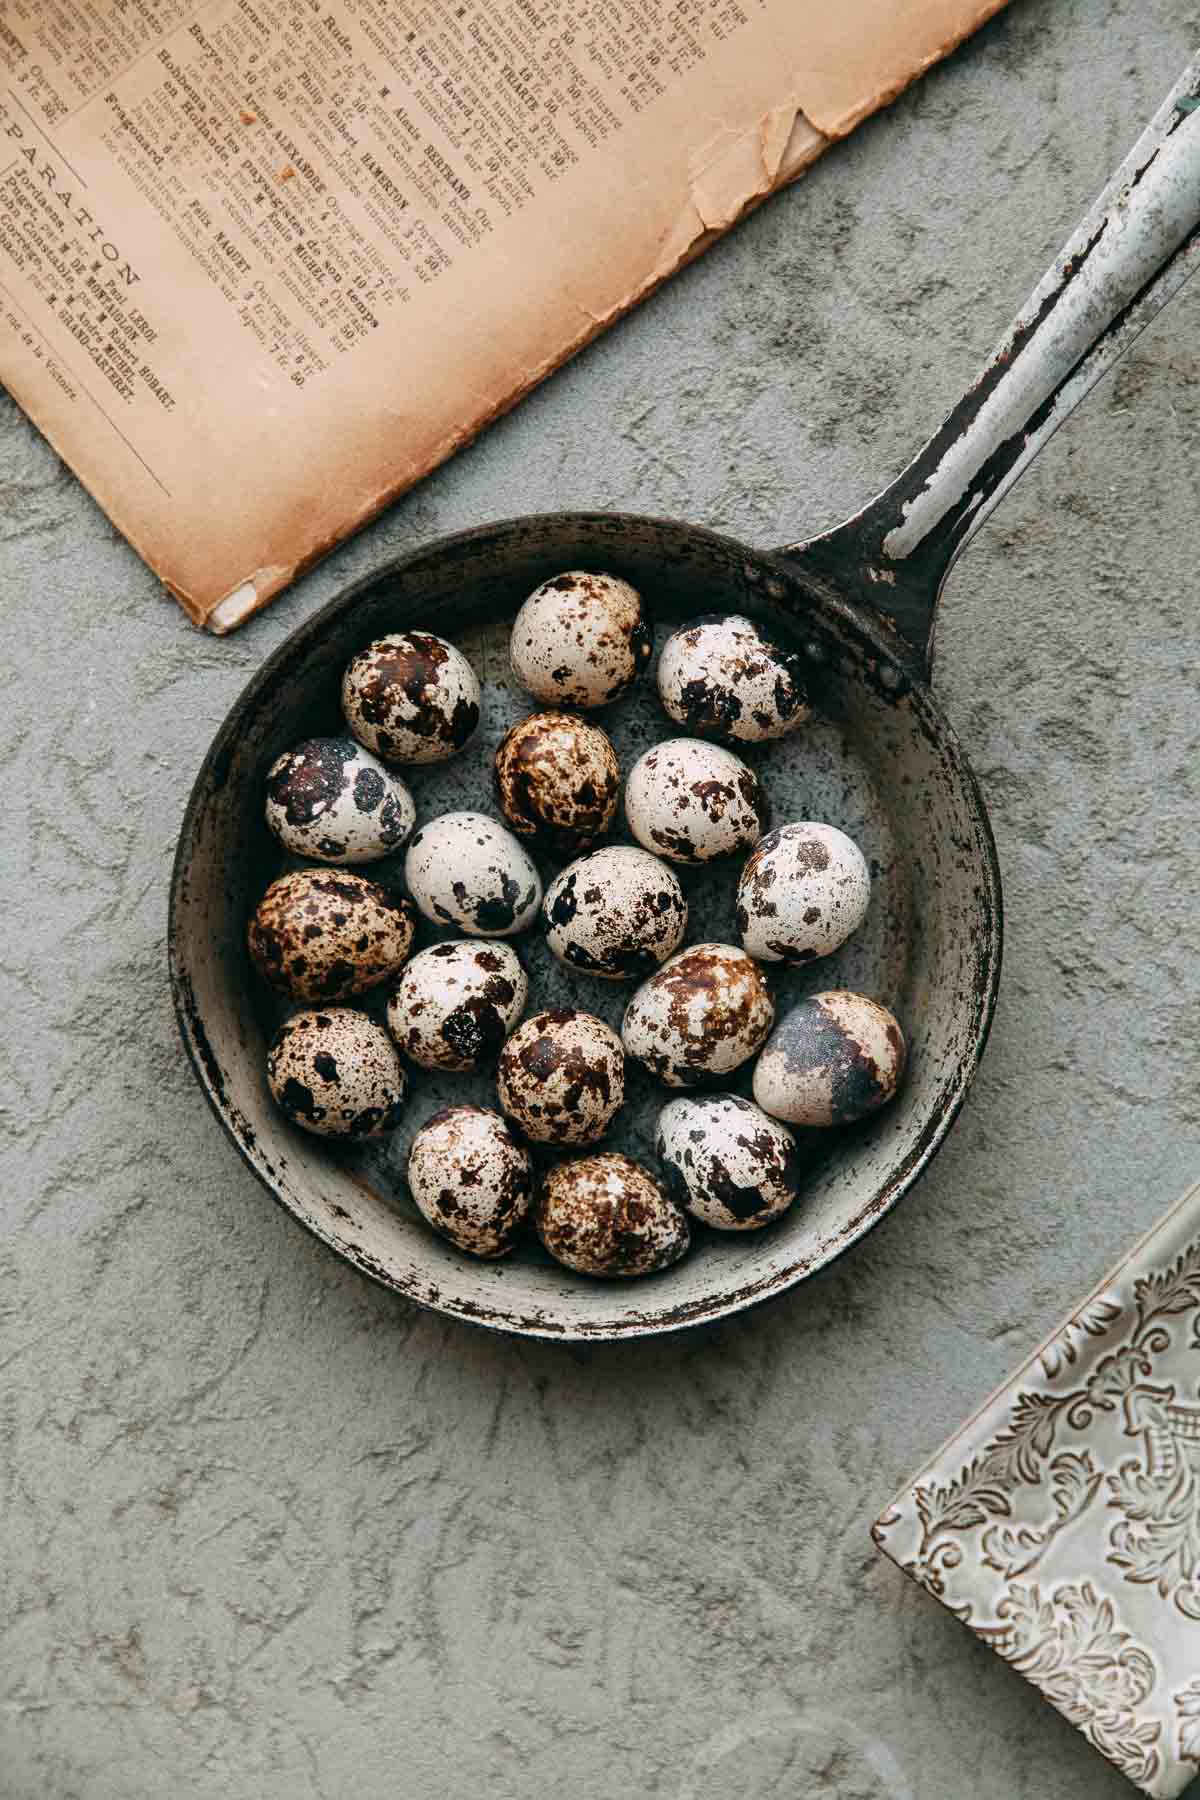 Quail eggs in a frying pan on a table, ready for cooking.